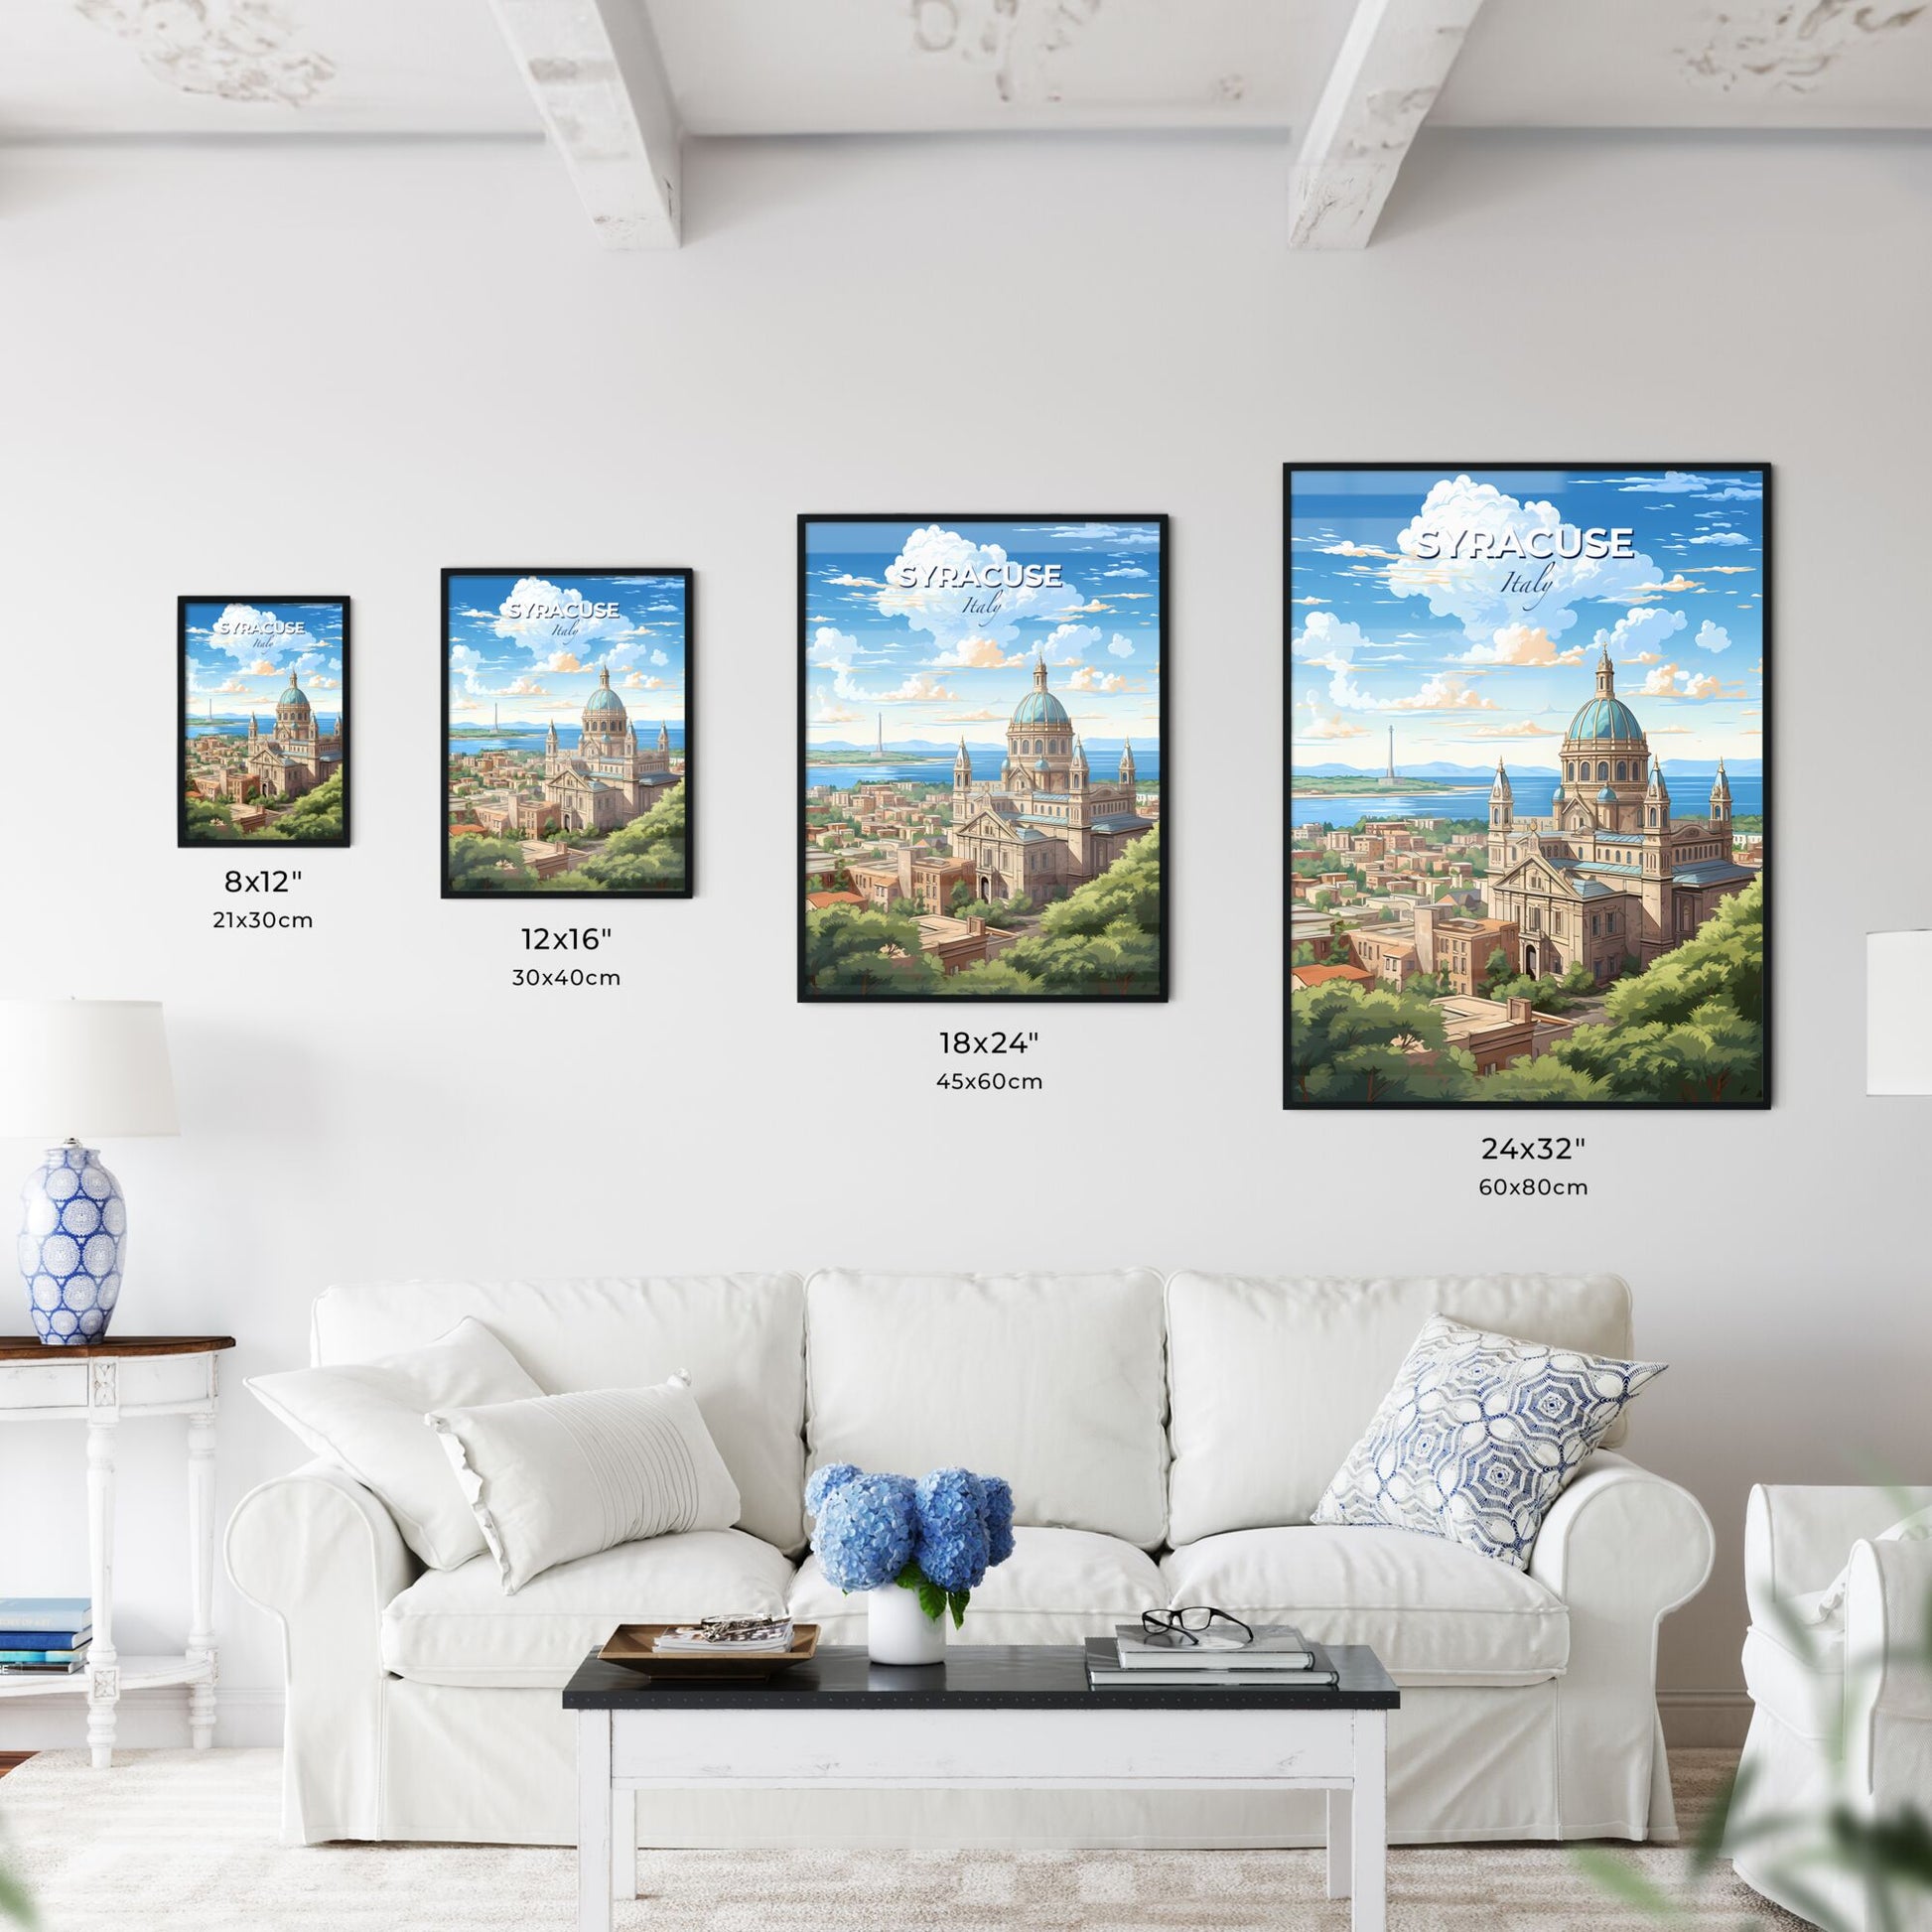 Syracuse Italy Skyline - A Large Building With A Dome And A City Landscape - Customizable Travel Gift Default Title